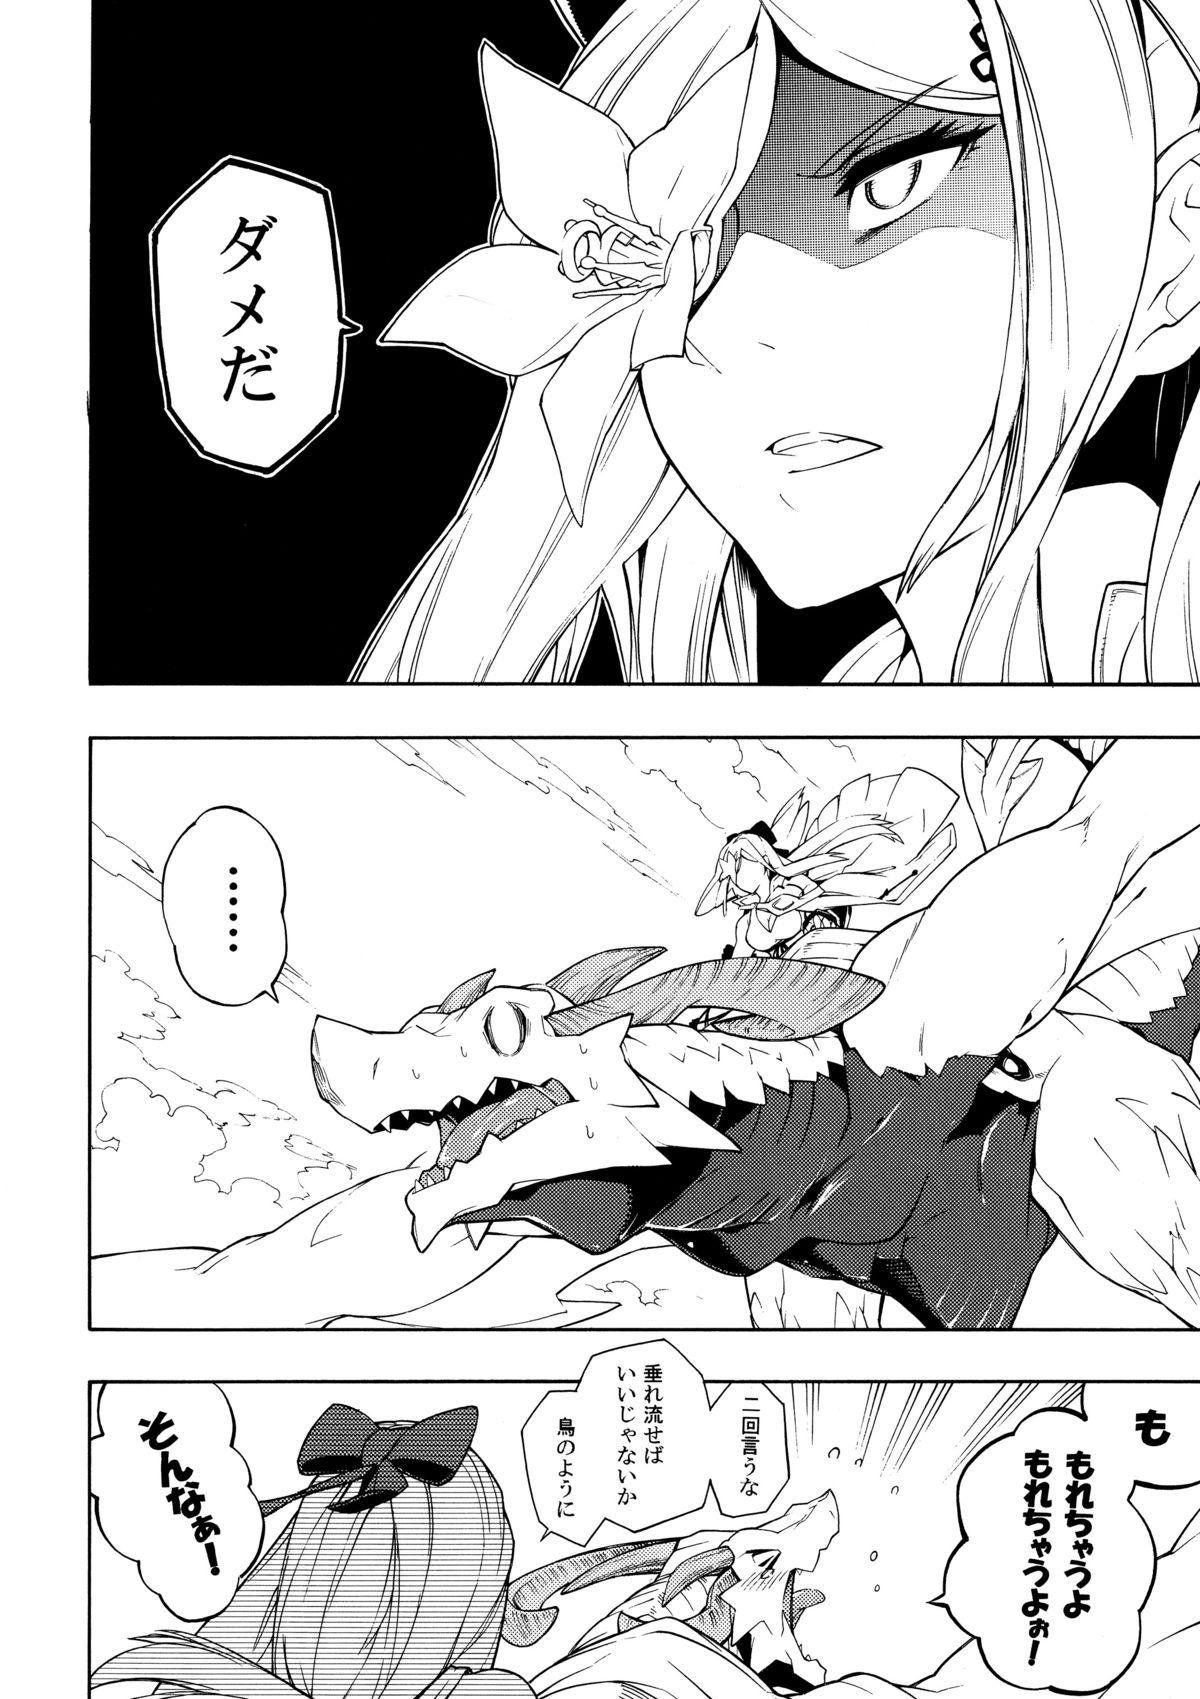 Dominicana MIKHAIL FORTUNE - Drakengard Soloboy - Page 7